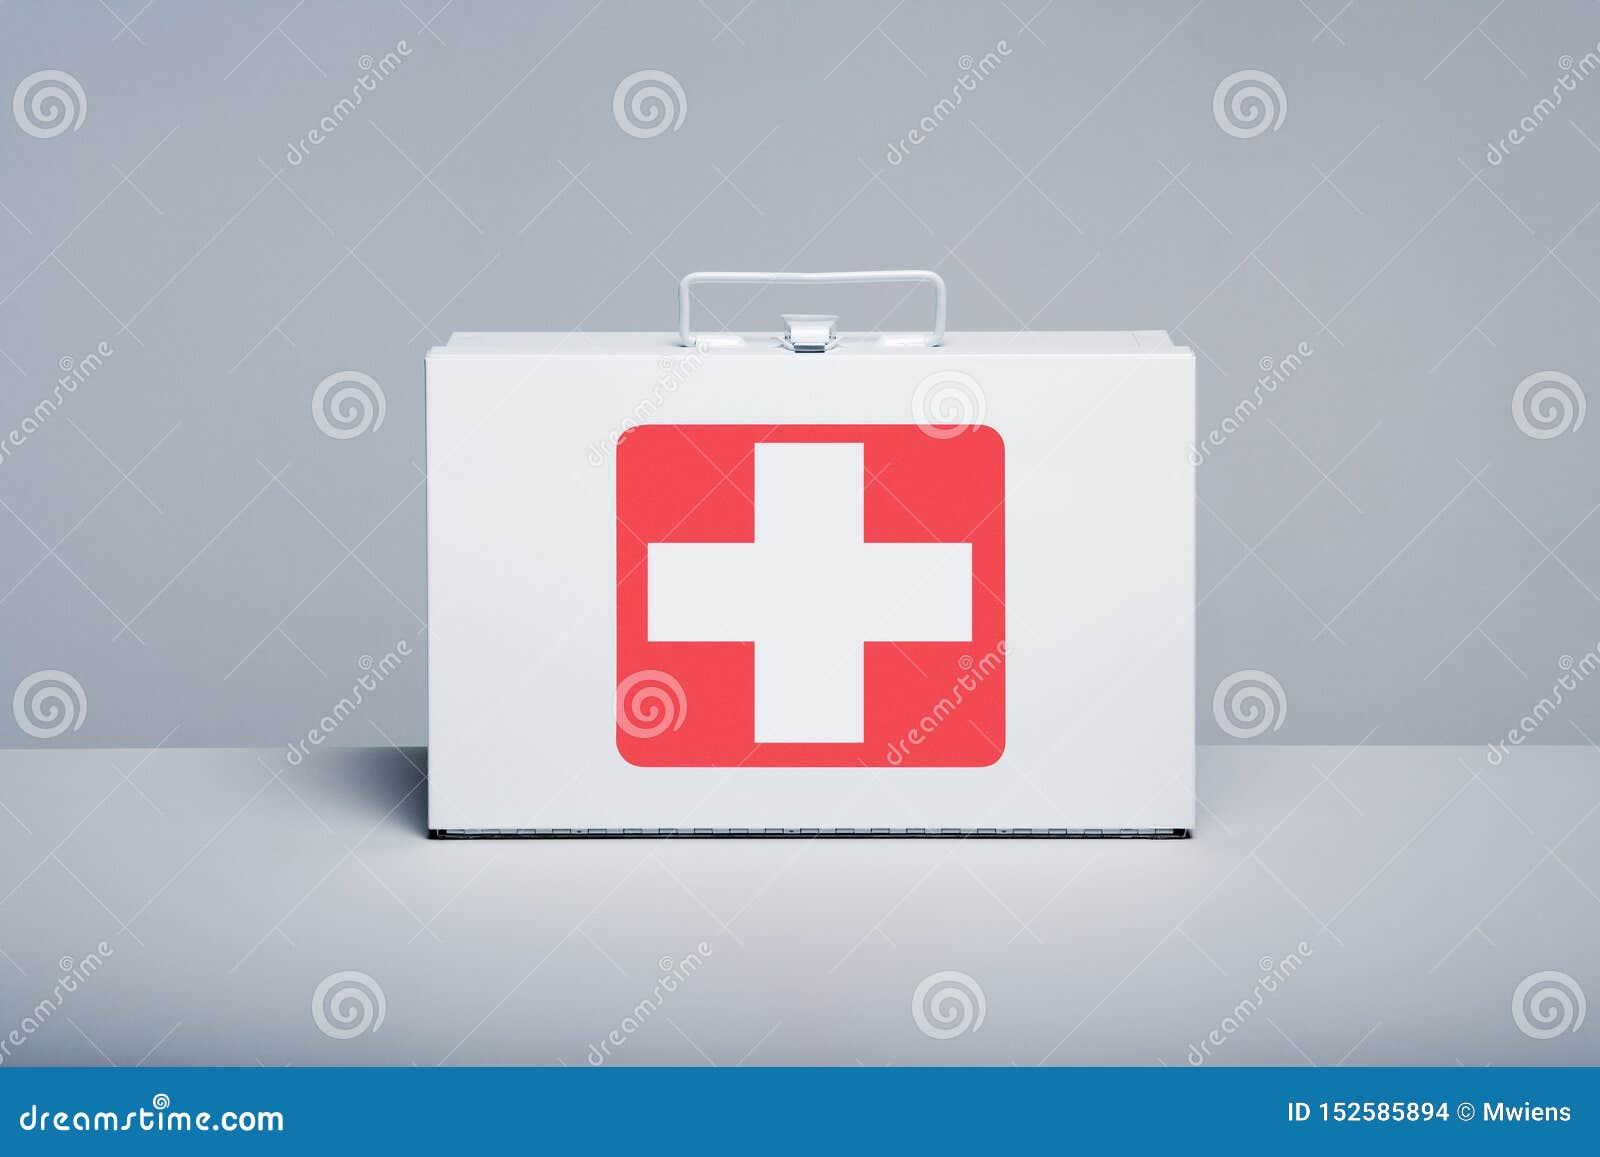 metal first aid kit on grey background